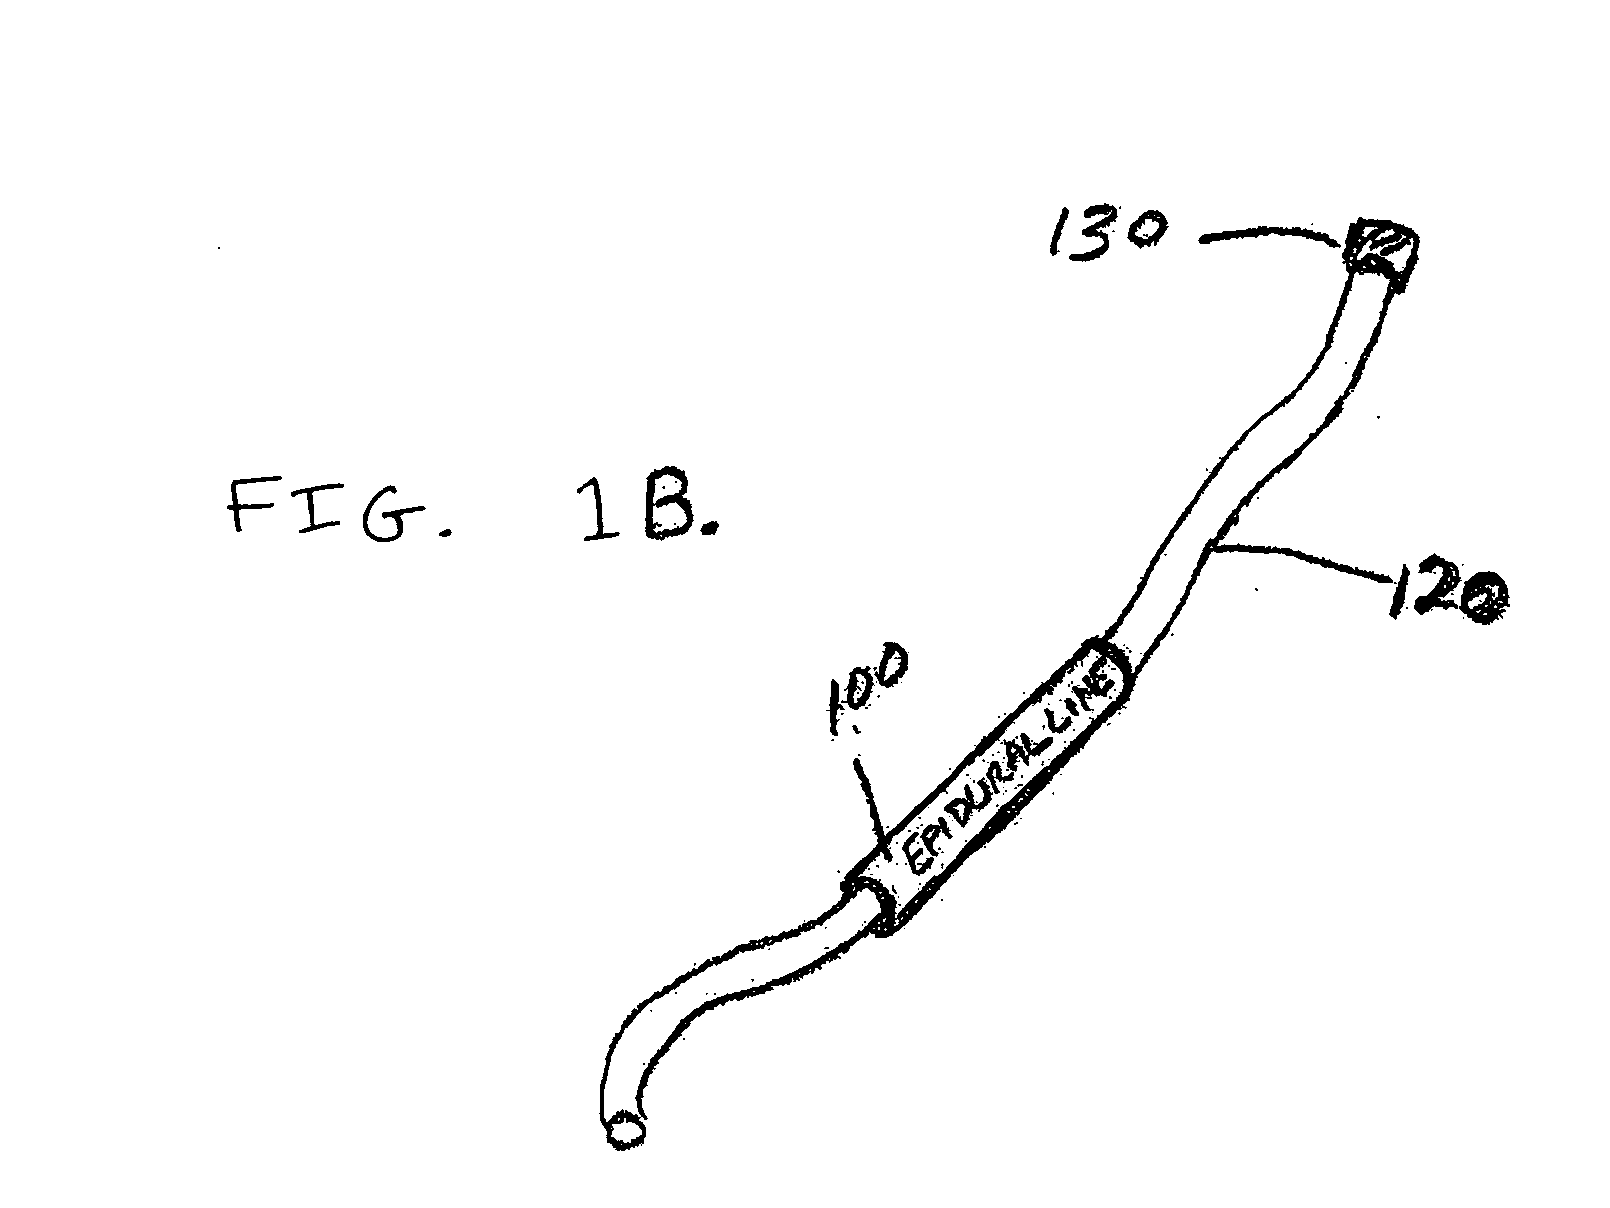 Coding device for identifying medical lines